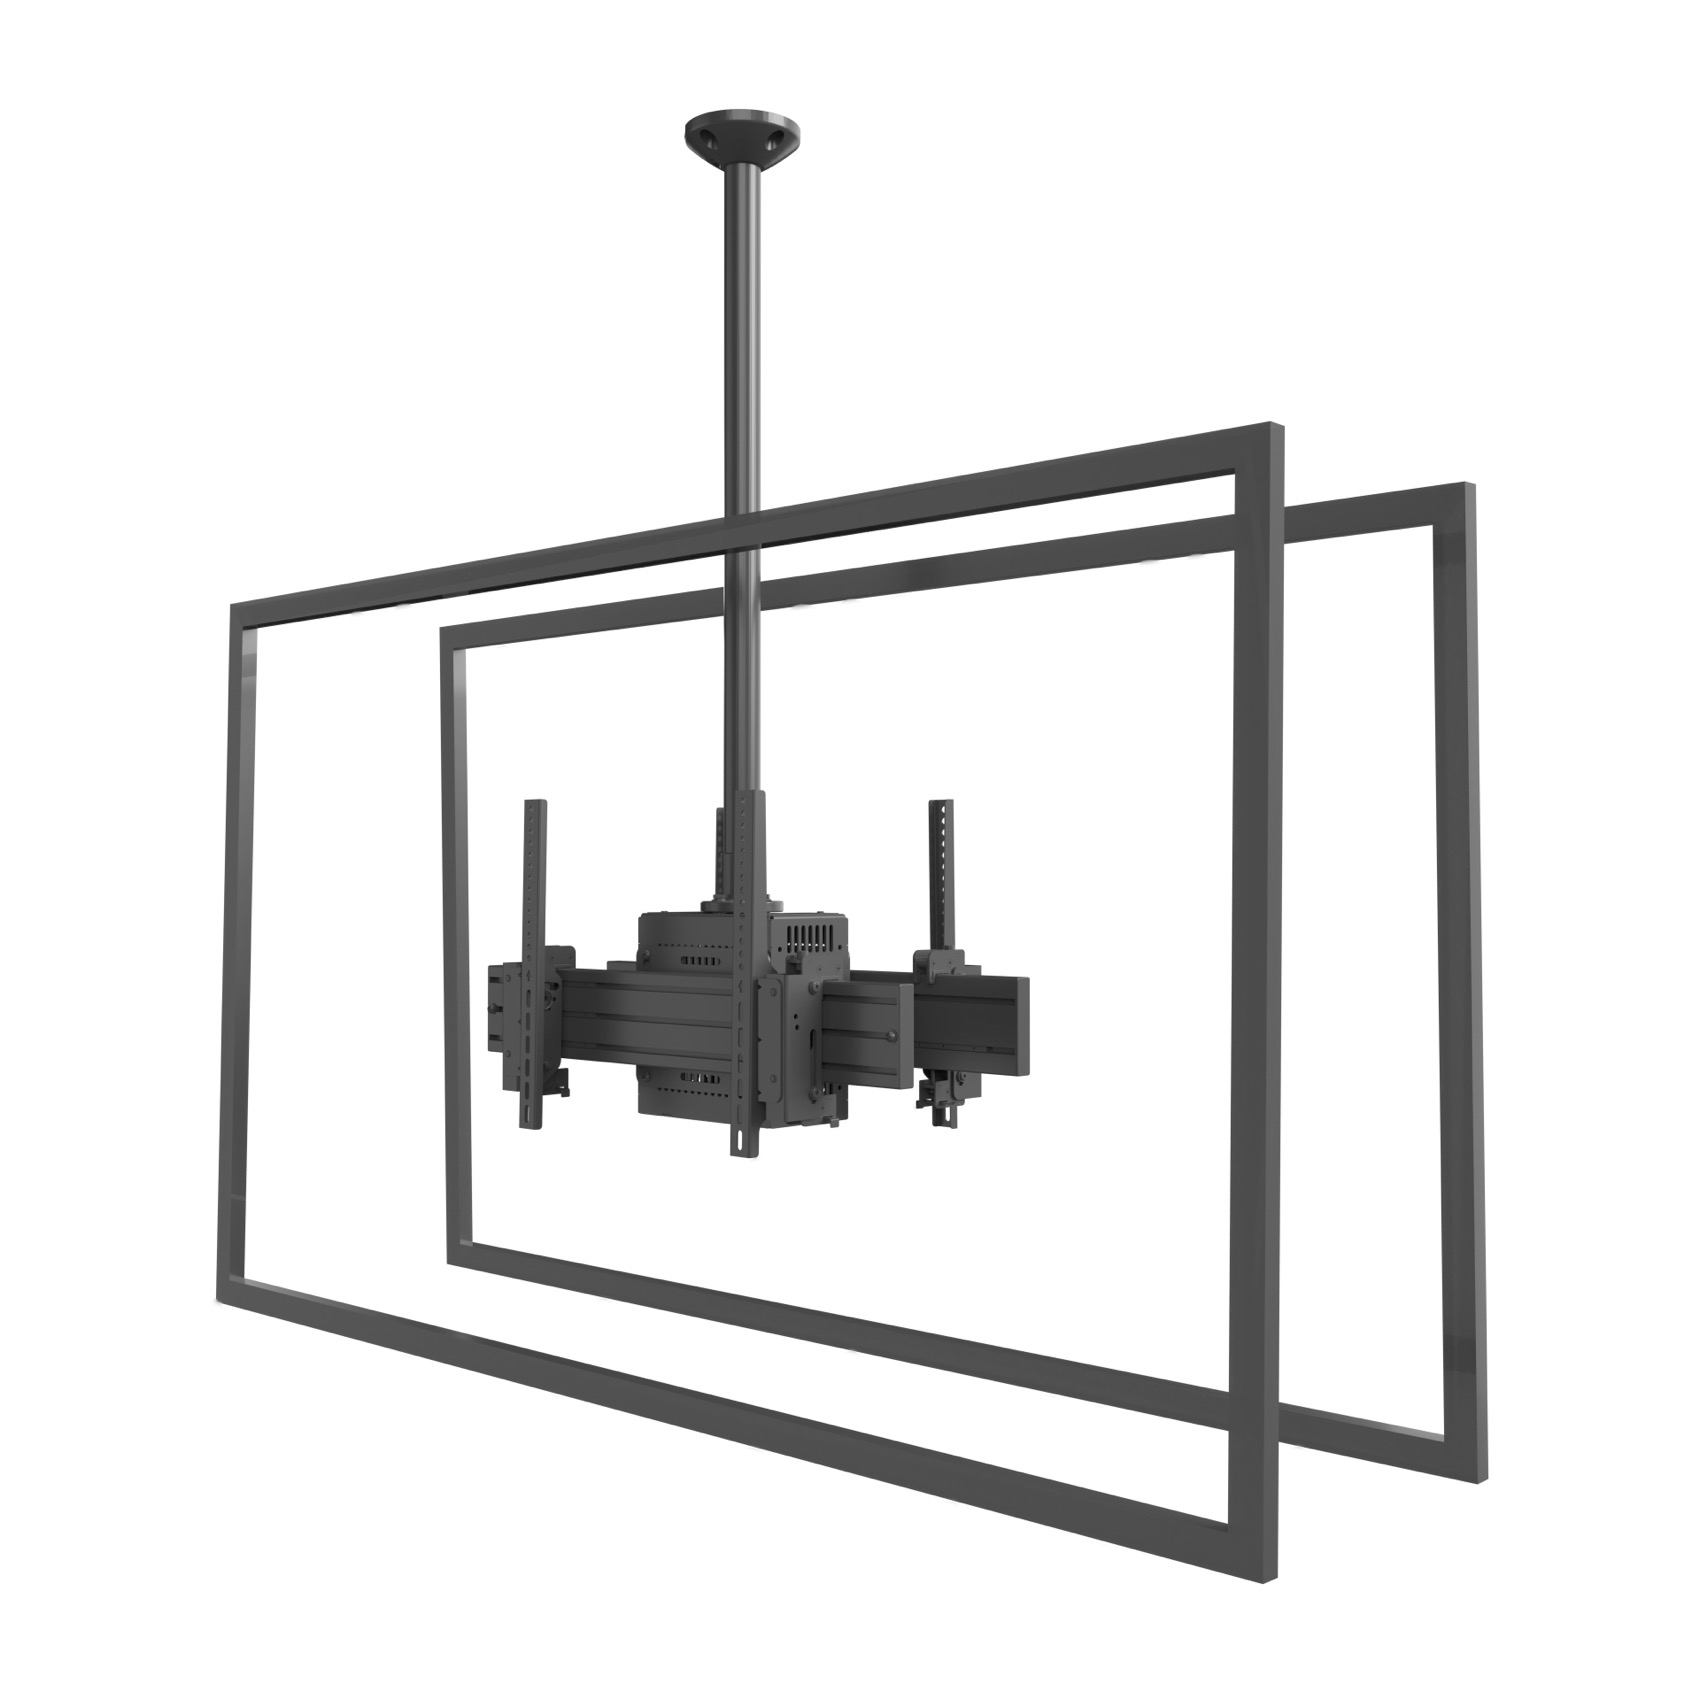 Strong Carbon Series Dual Sided Landscape Ceiling Mount - Large - 40'-80” 